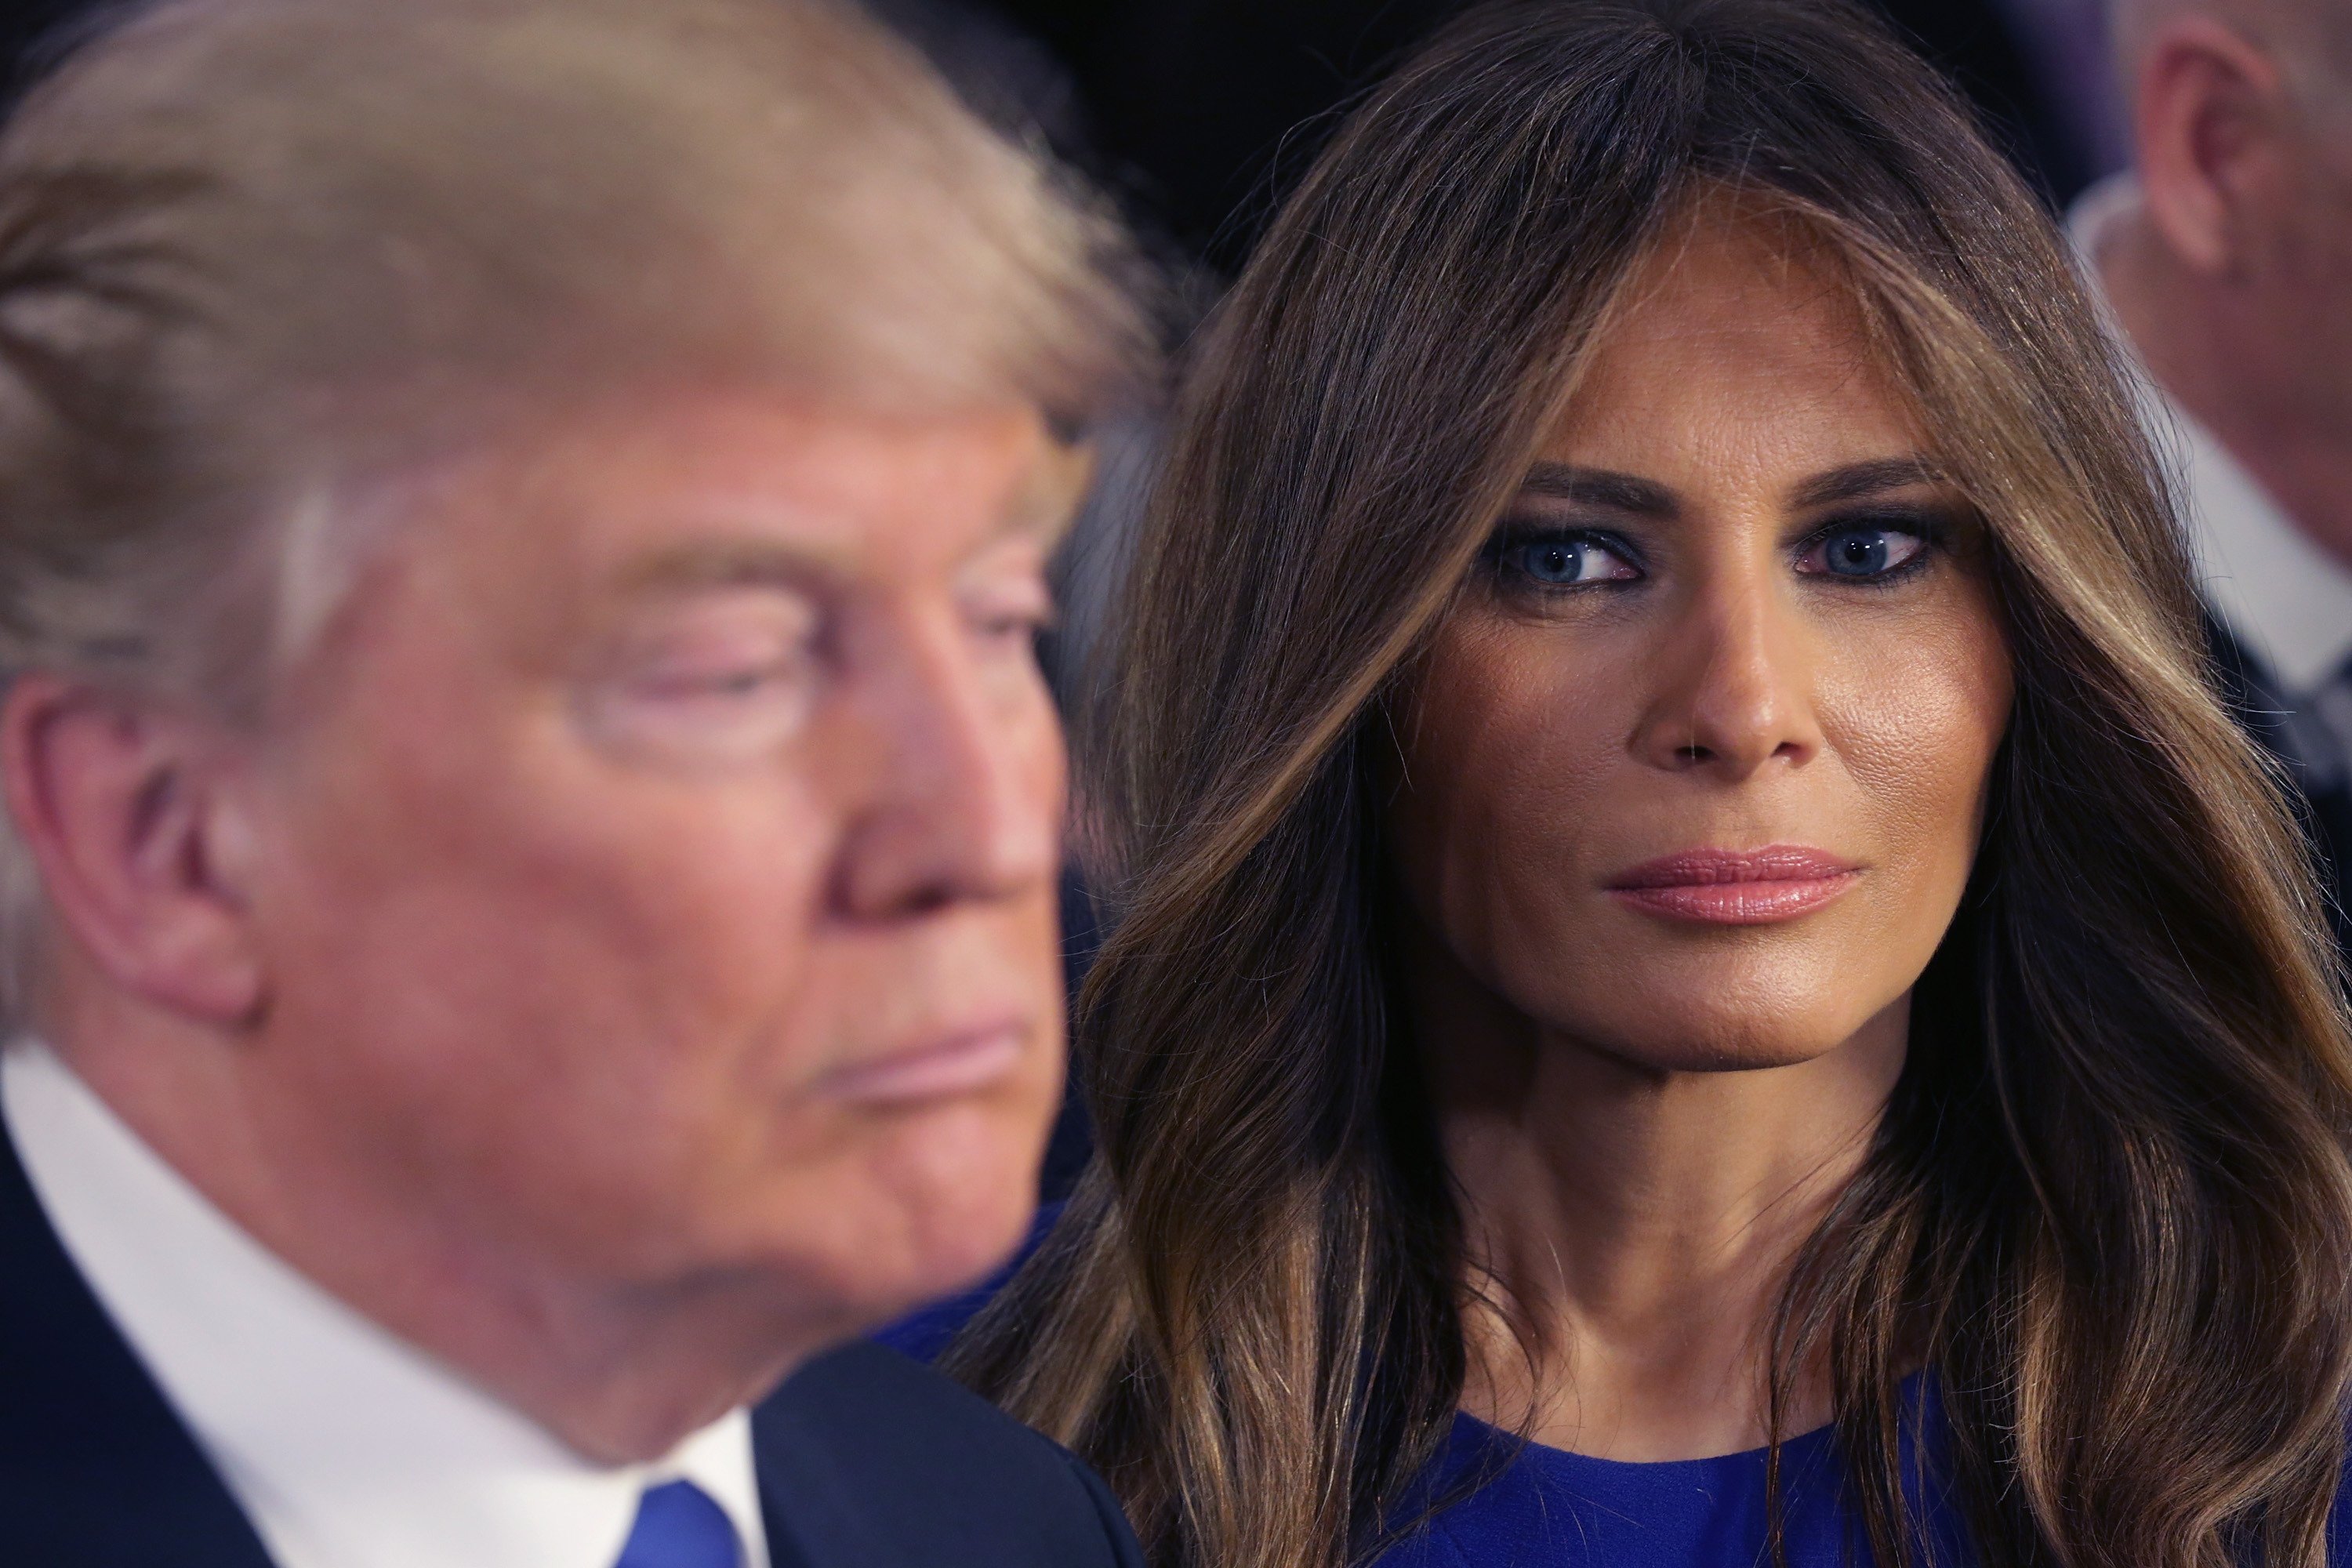 Donald Trump's wife, Melania Trump, whose GQ photo shoot was used in an attack ad against her husband.